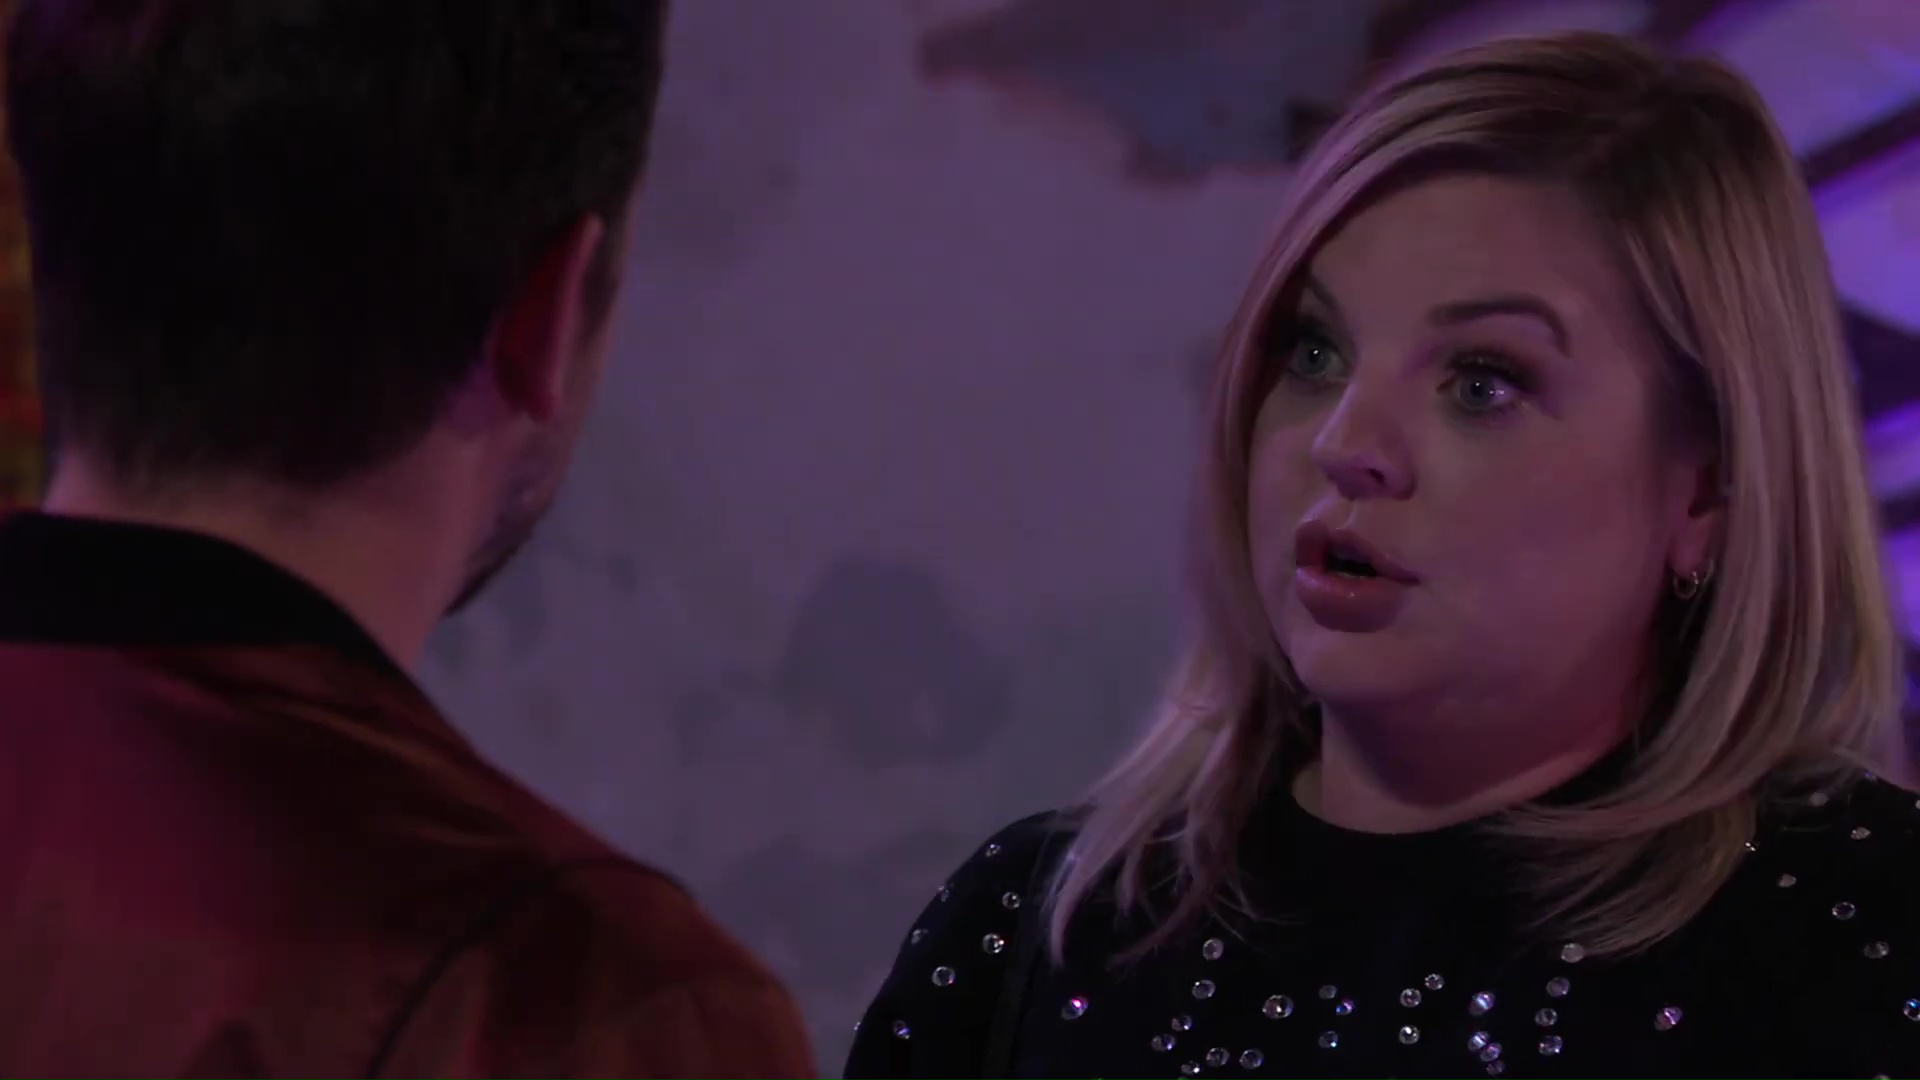 maxie lectures spinelli GH